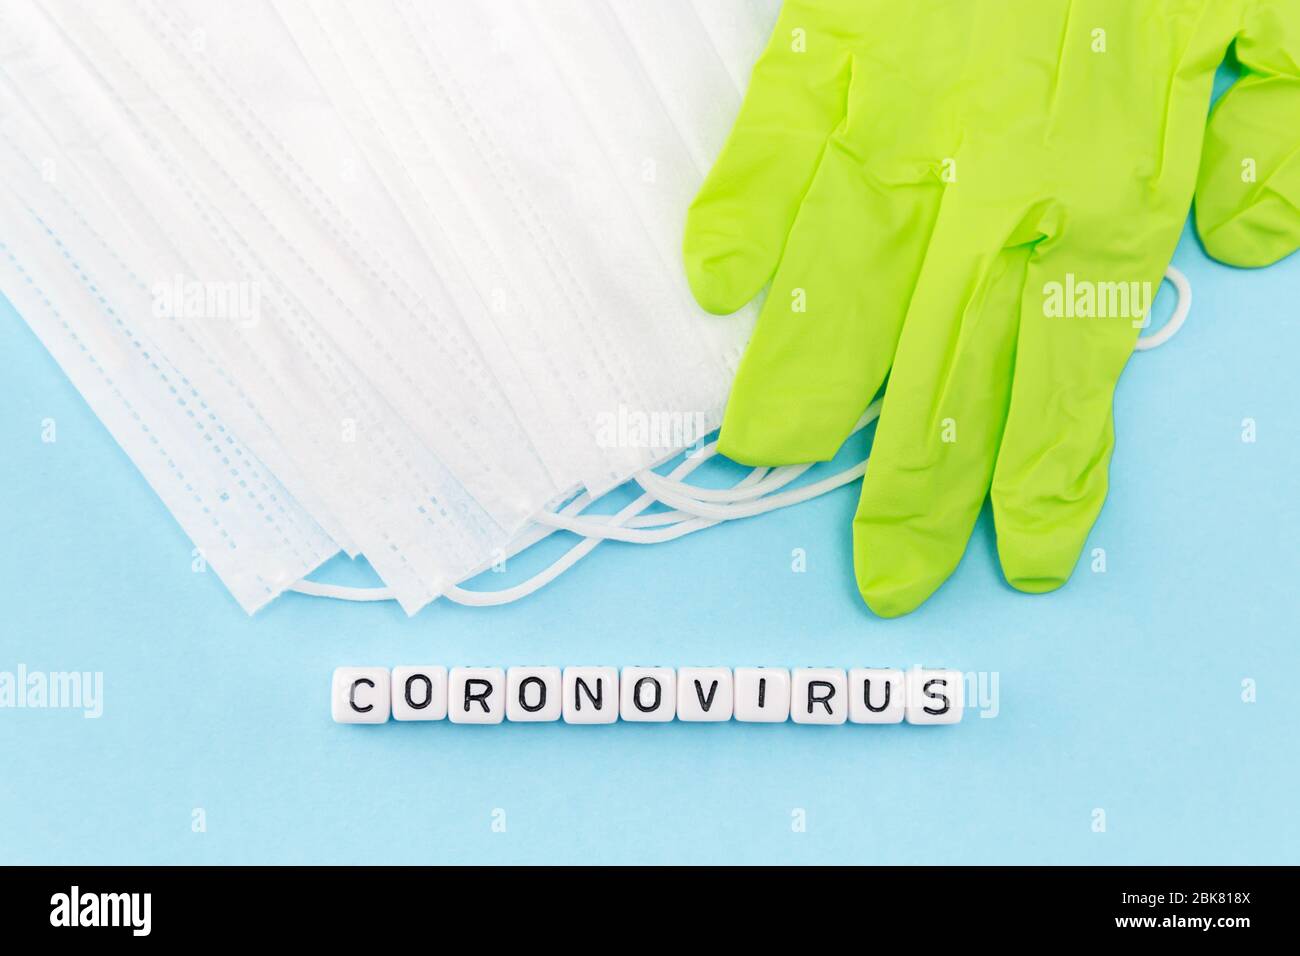 medical masks, gloves and coronovirus word composed with cubes on blue background Stock Photo